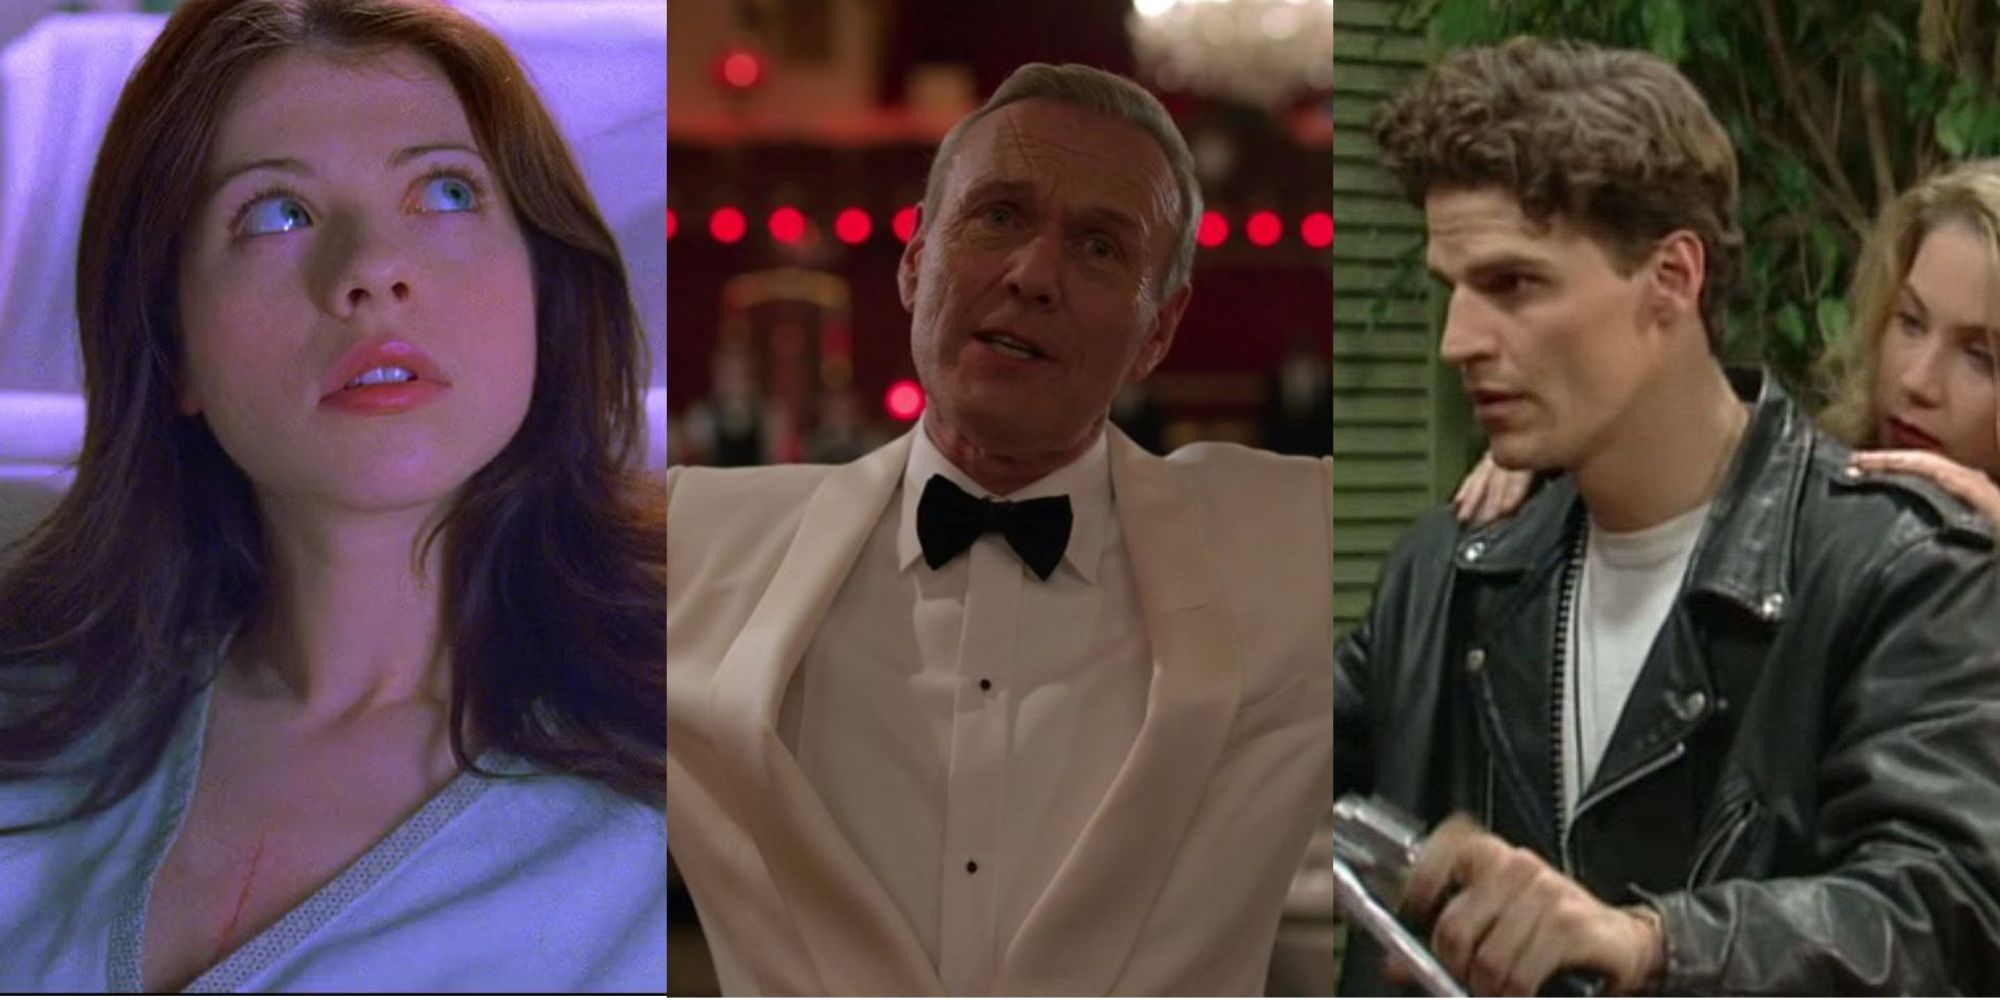 The actors from Buffy the Vampire Slayer in other TV shows